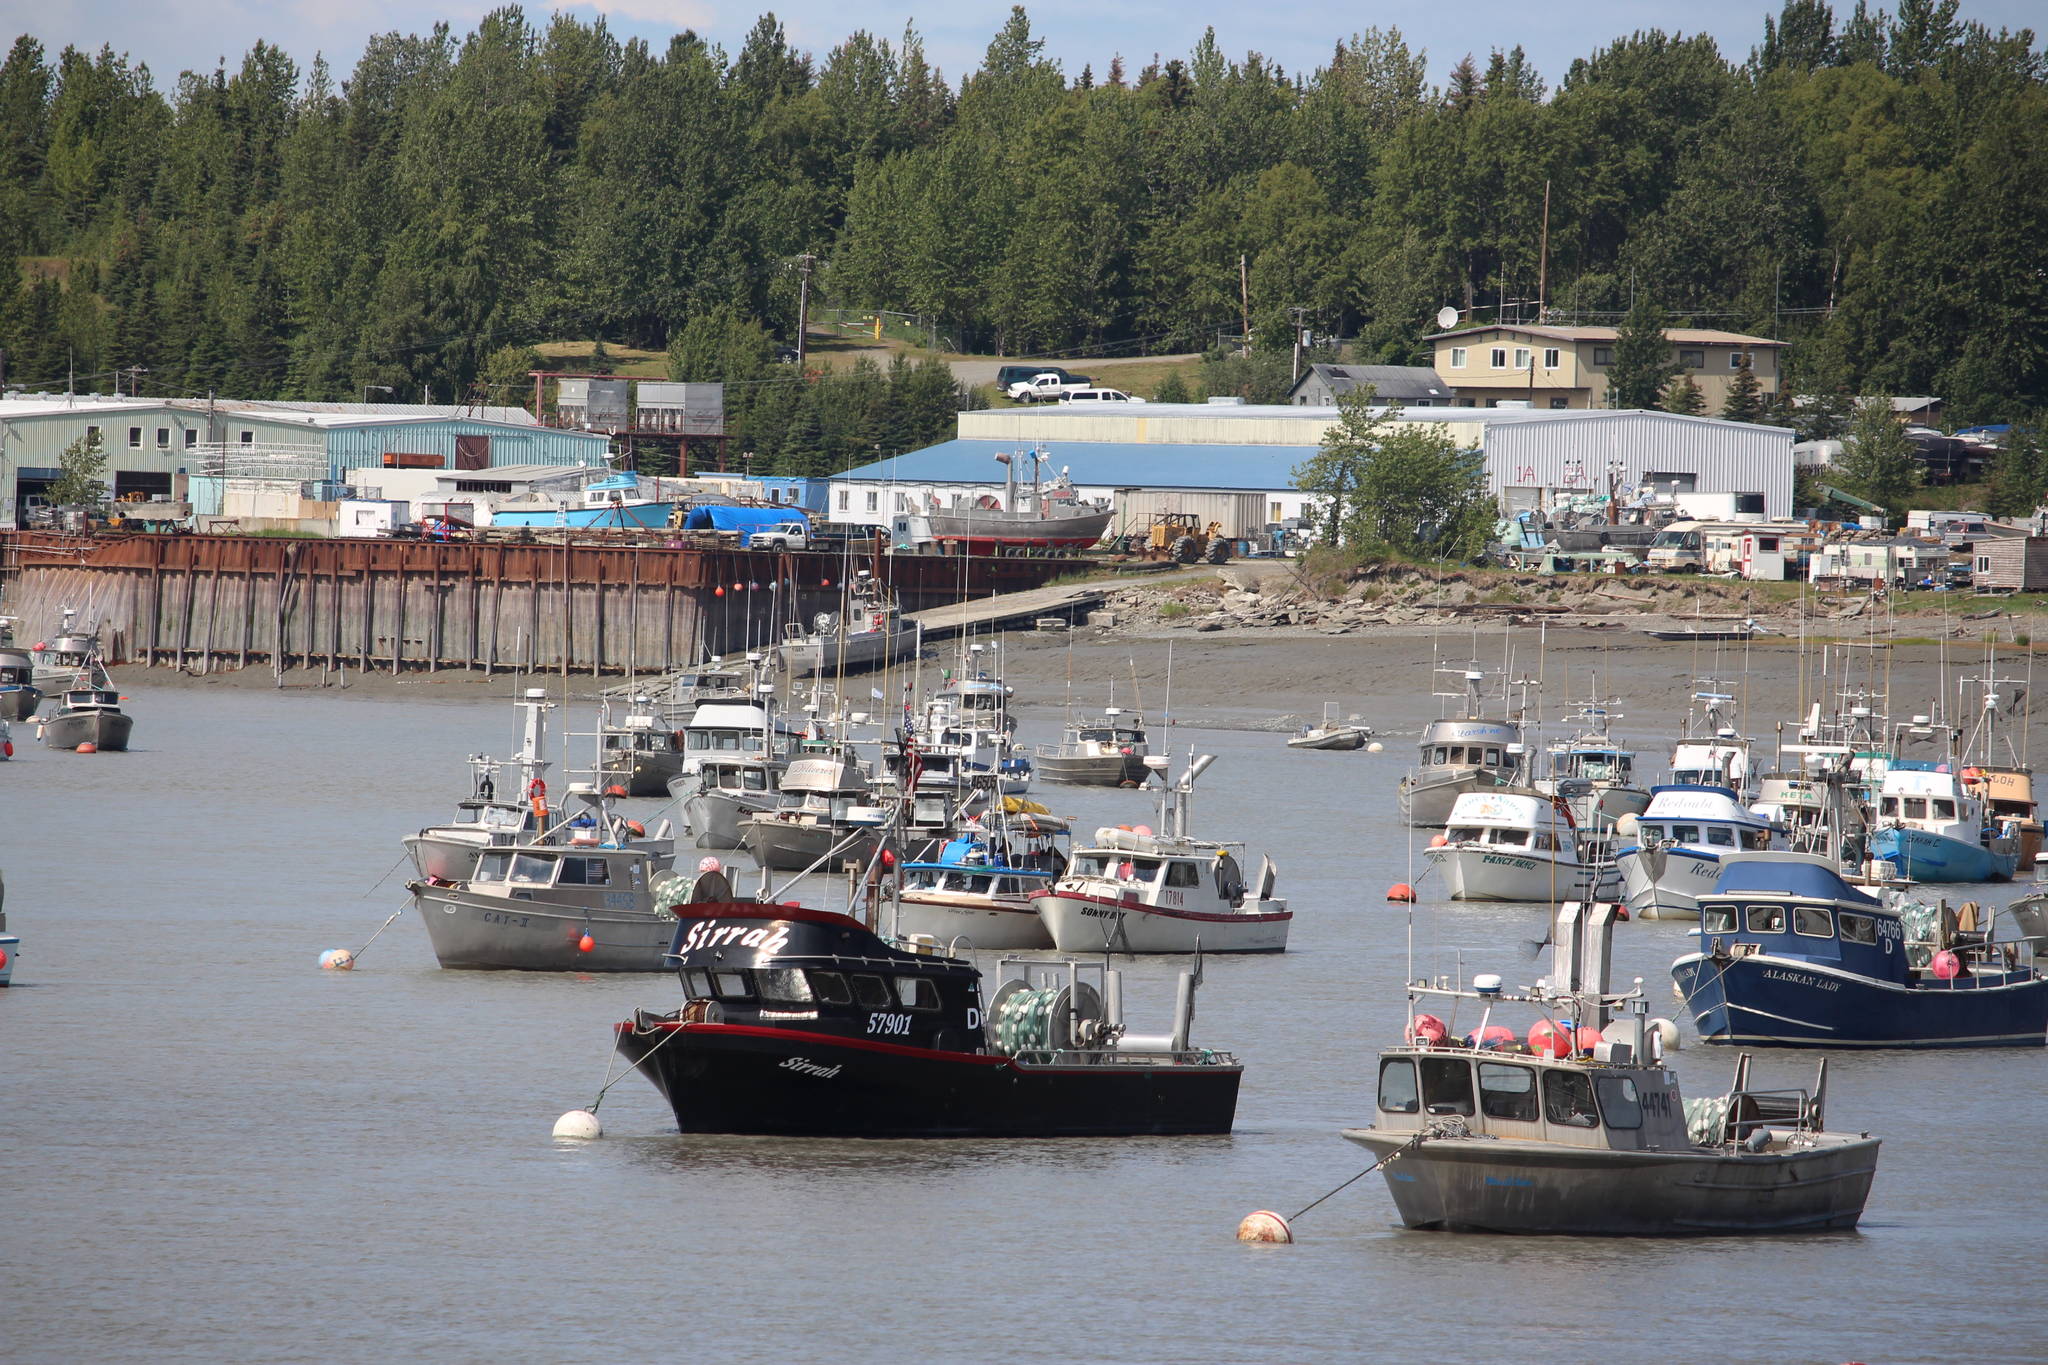 Brian Mazurek/Peninsula Clarion)
Commercial fishing vessels are moored near the mouth of the Kenai River on July 10, 2020.